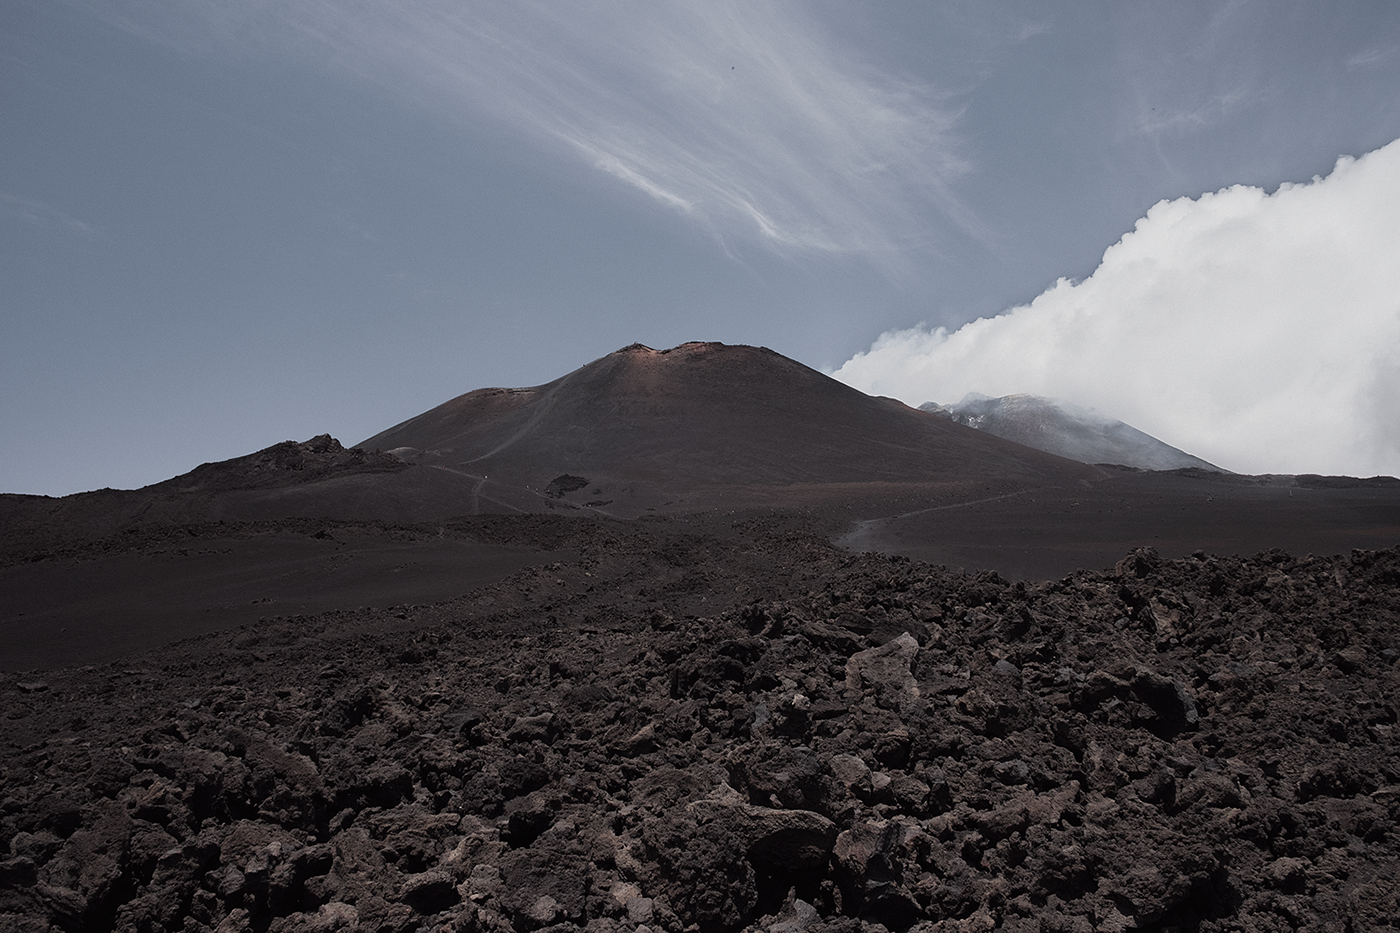 Italy Mount Etna Nature Photography  volcano Landscape contrast dog mountain path